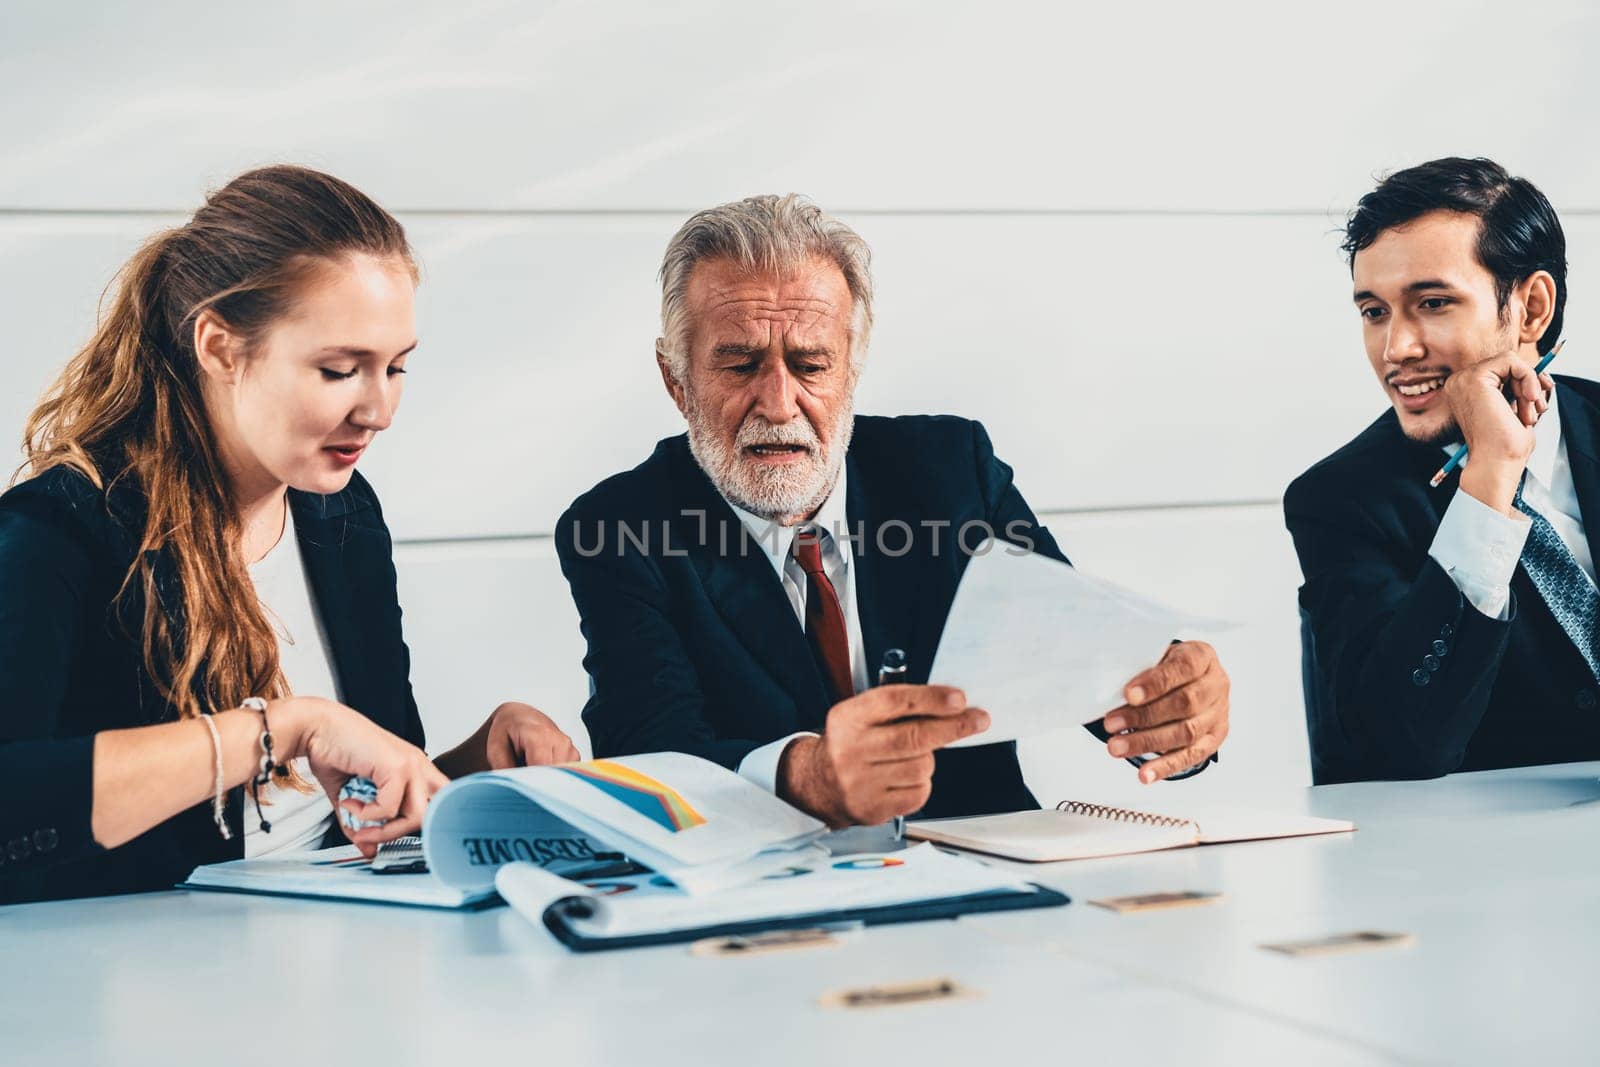 Senior old executive manager working with young businesspeople in office meeting room. Old man is company leader sitting with secretary and translator. International corporate business concept. uds